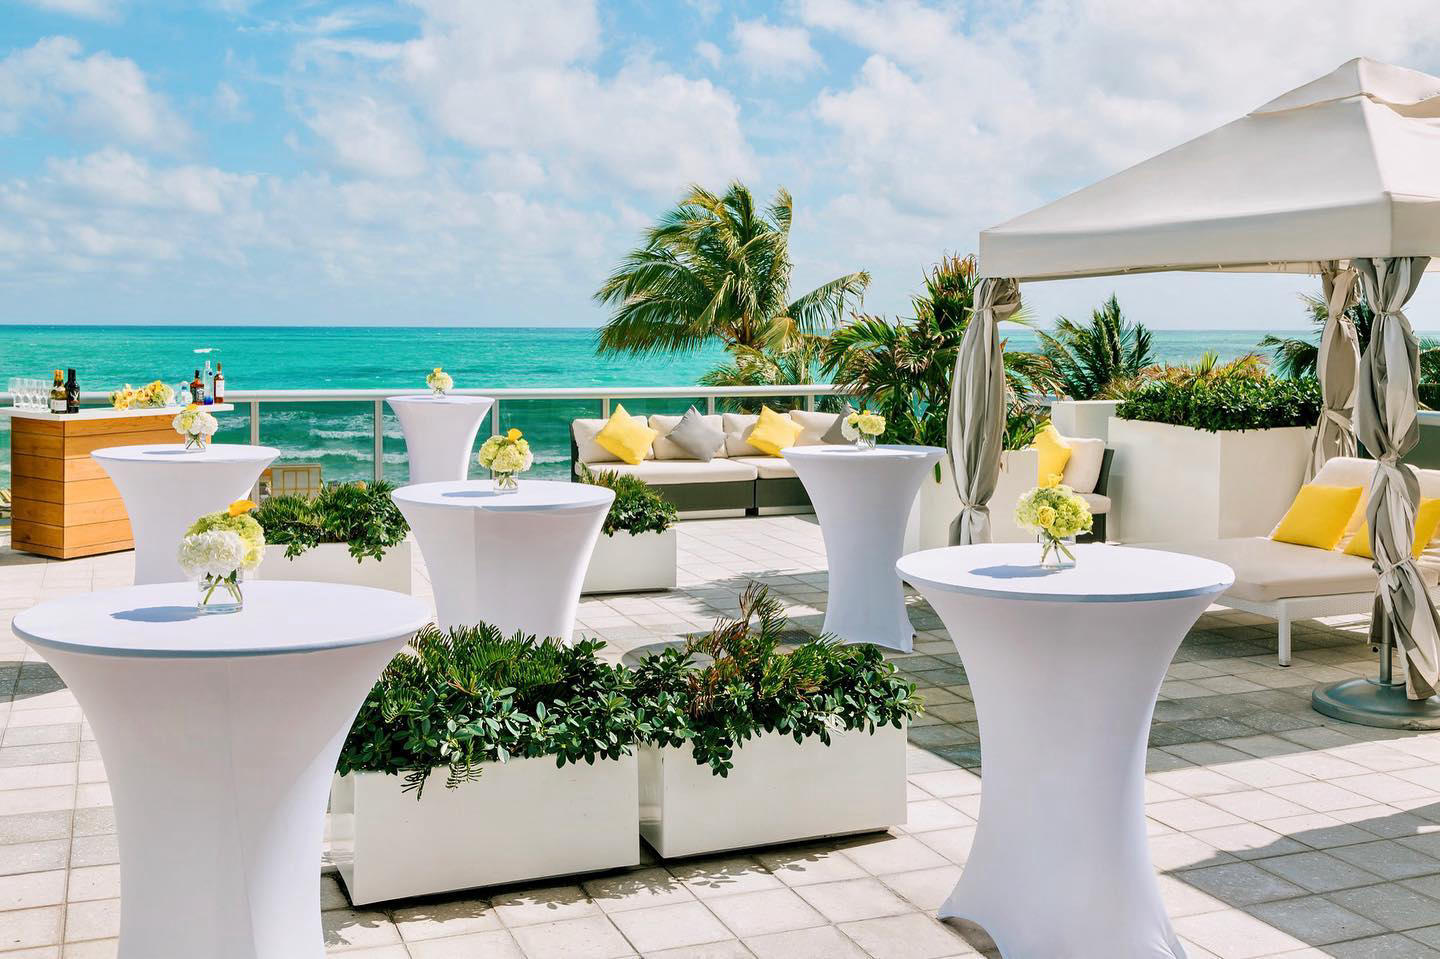 Hilton Cabana Miami Beach - #Sleigh this year's holiday celebrations and host your event at Hilton C